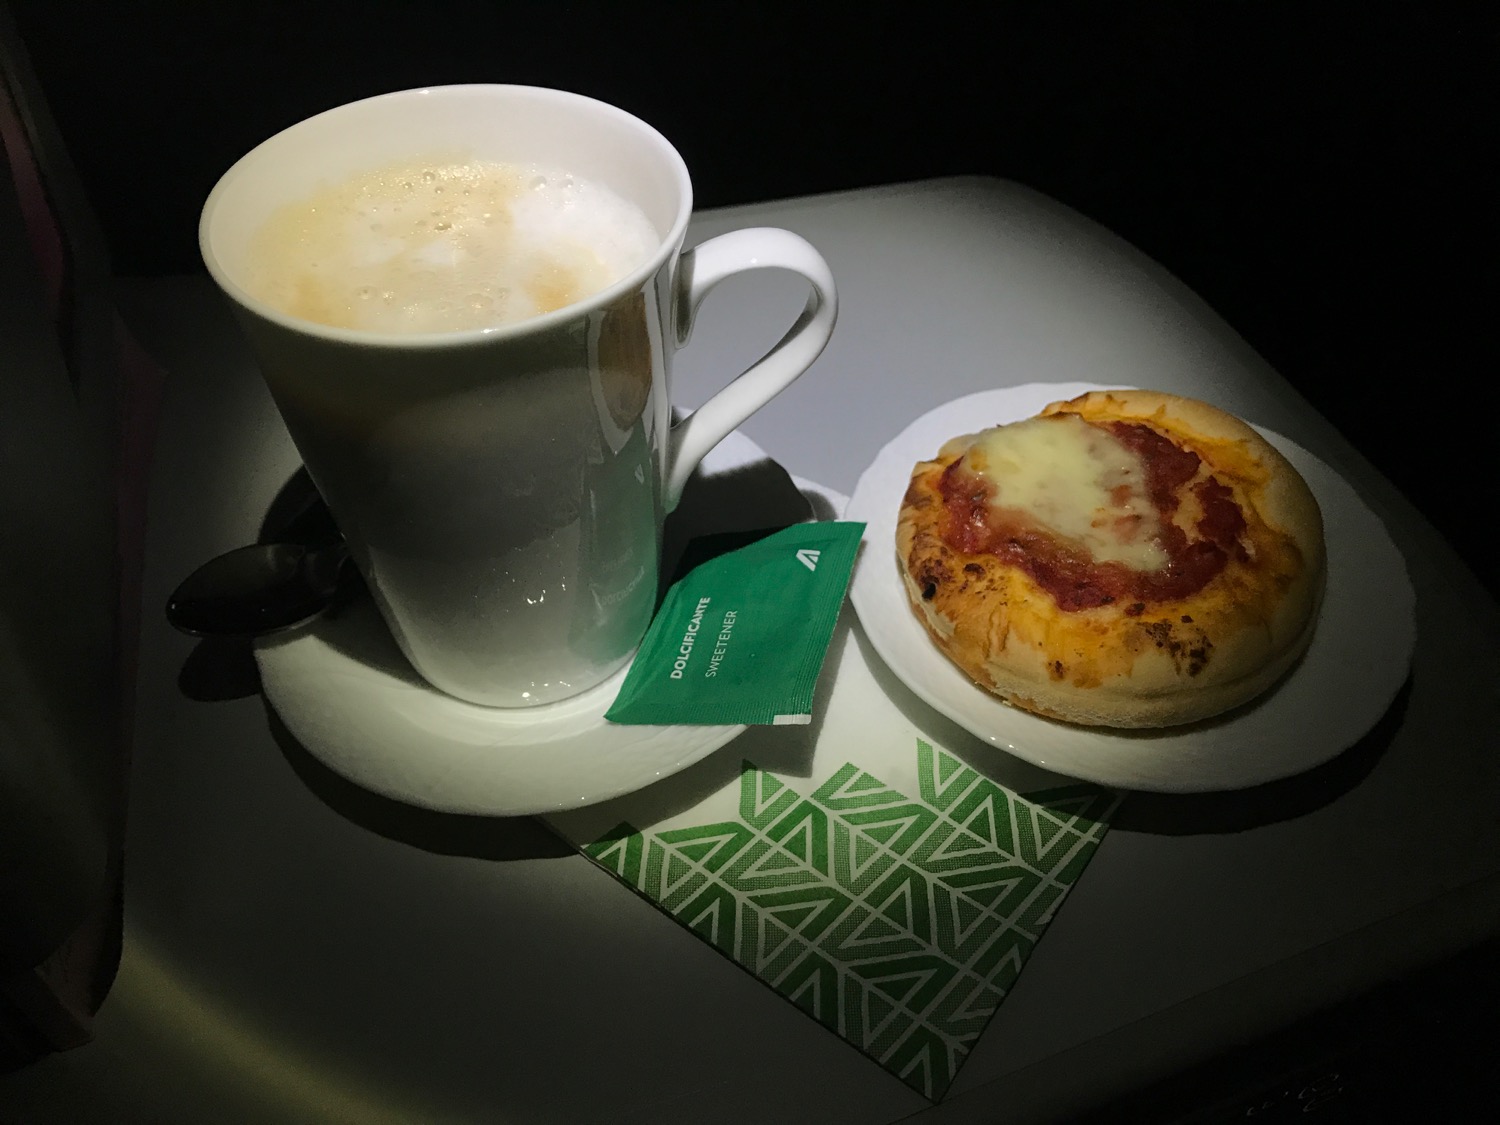 a cup of coffee and a small pizza on a plate